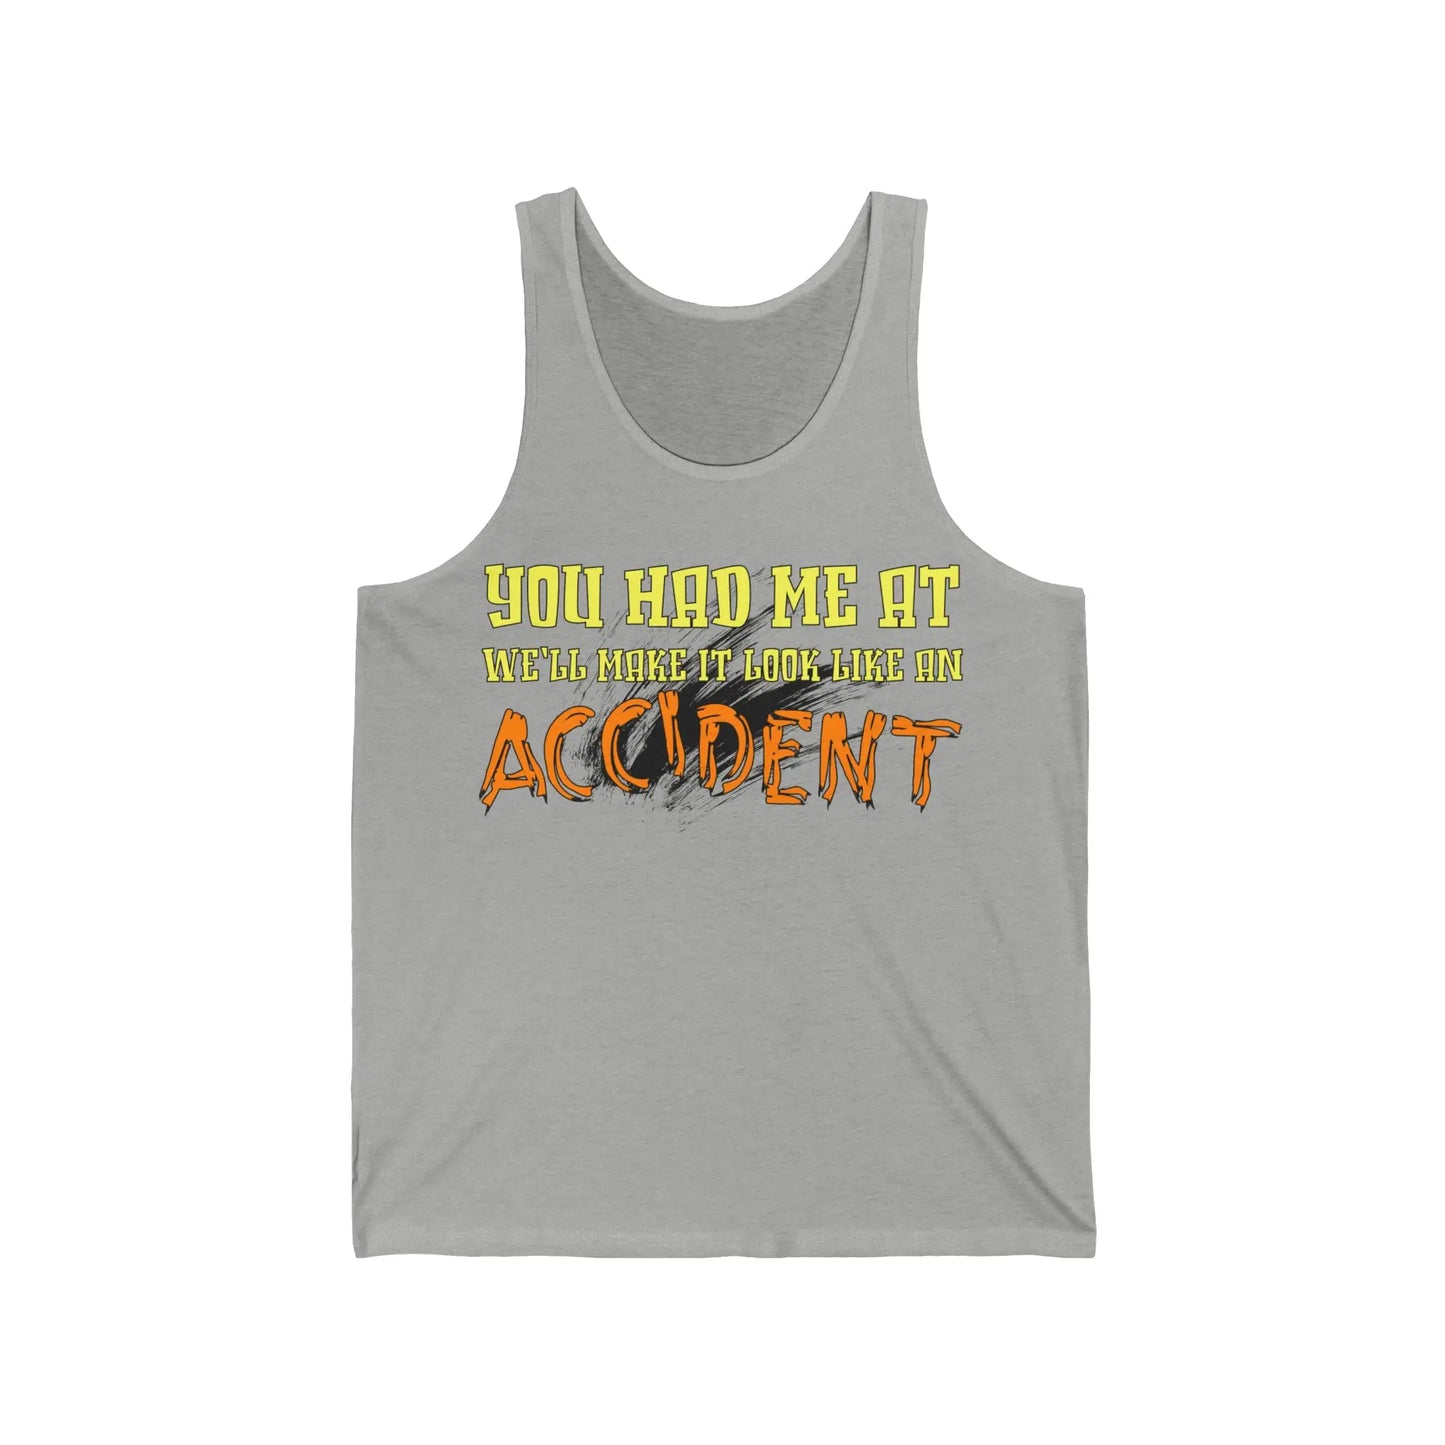 Make It Look Like An Accident Men's Jersey Tank - Wicked Tees